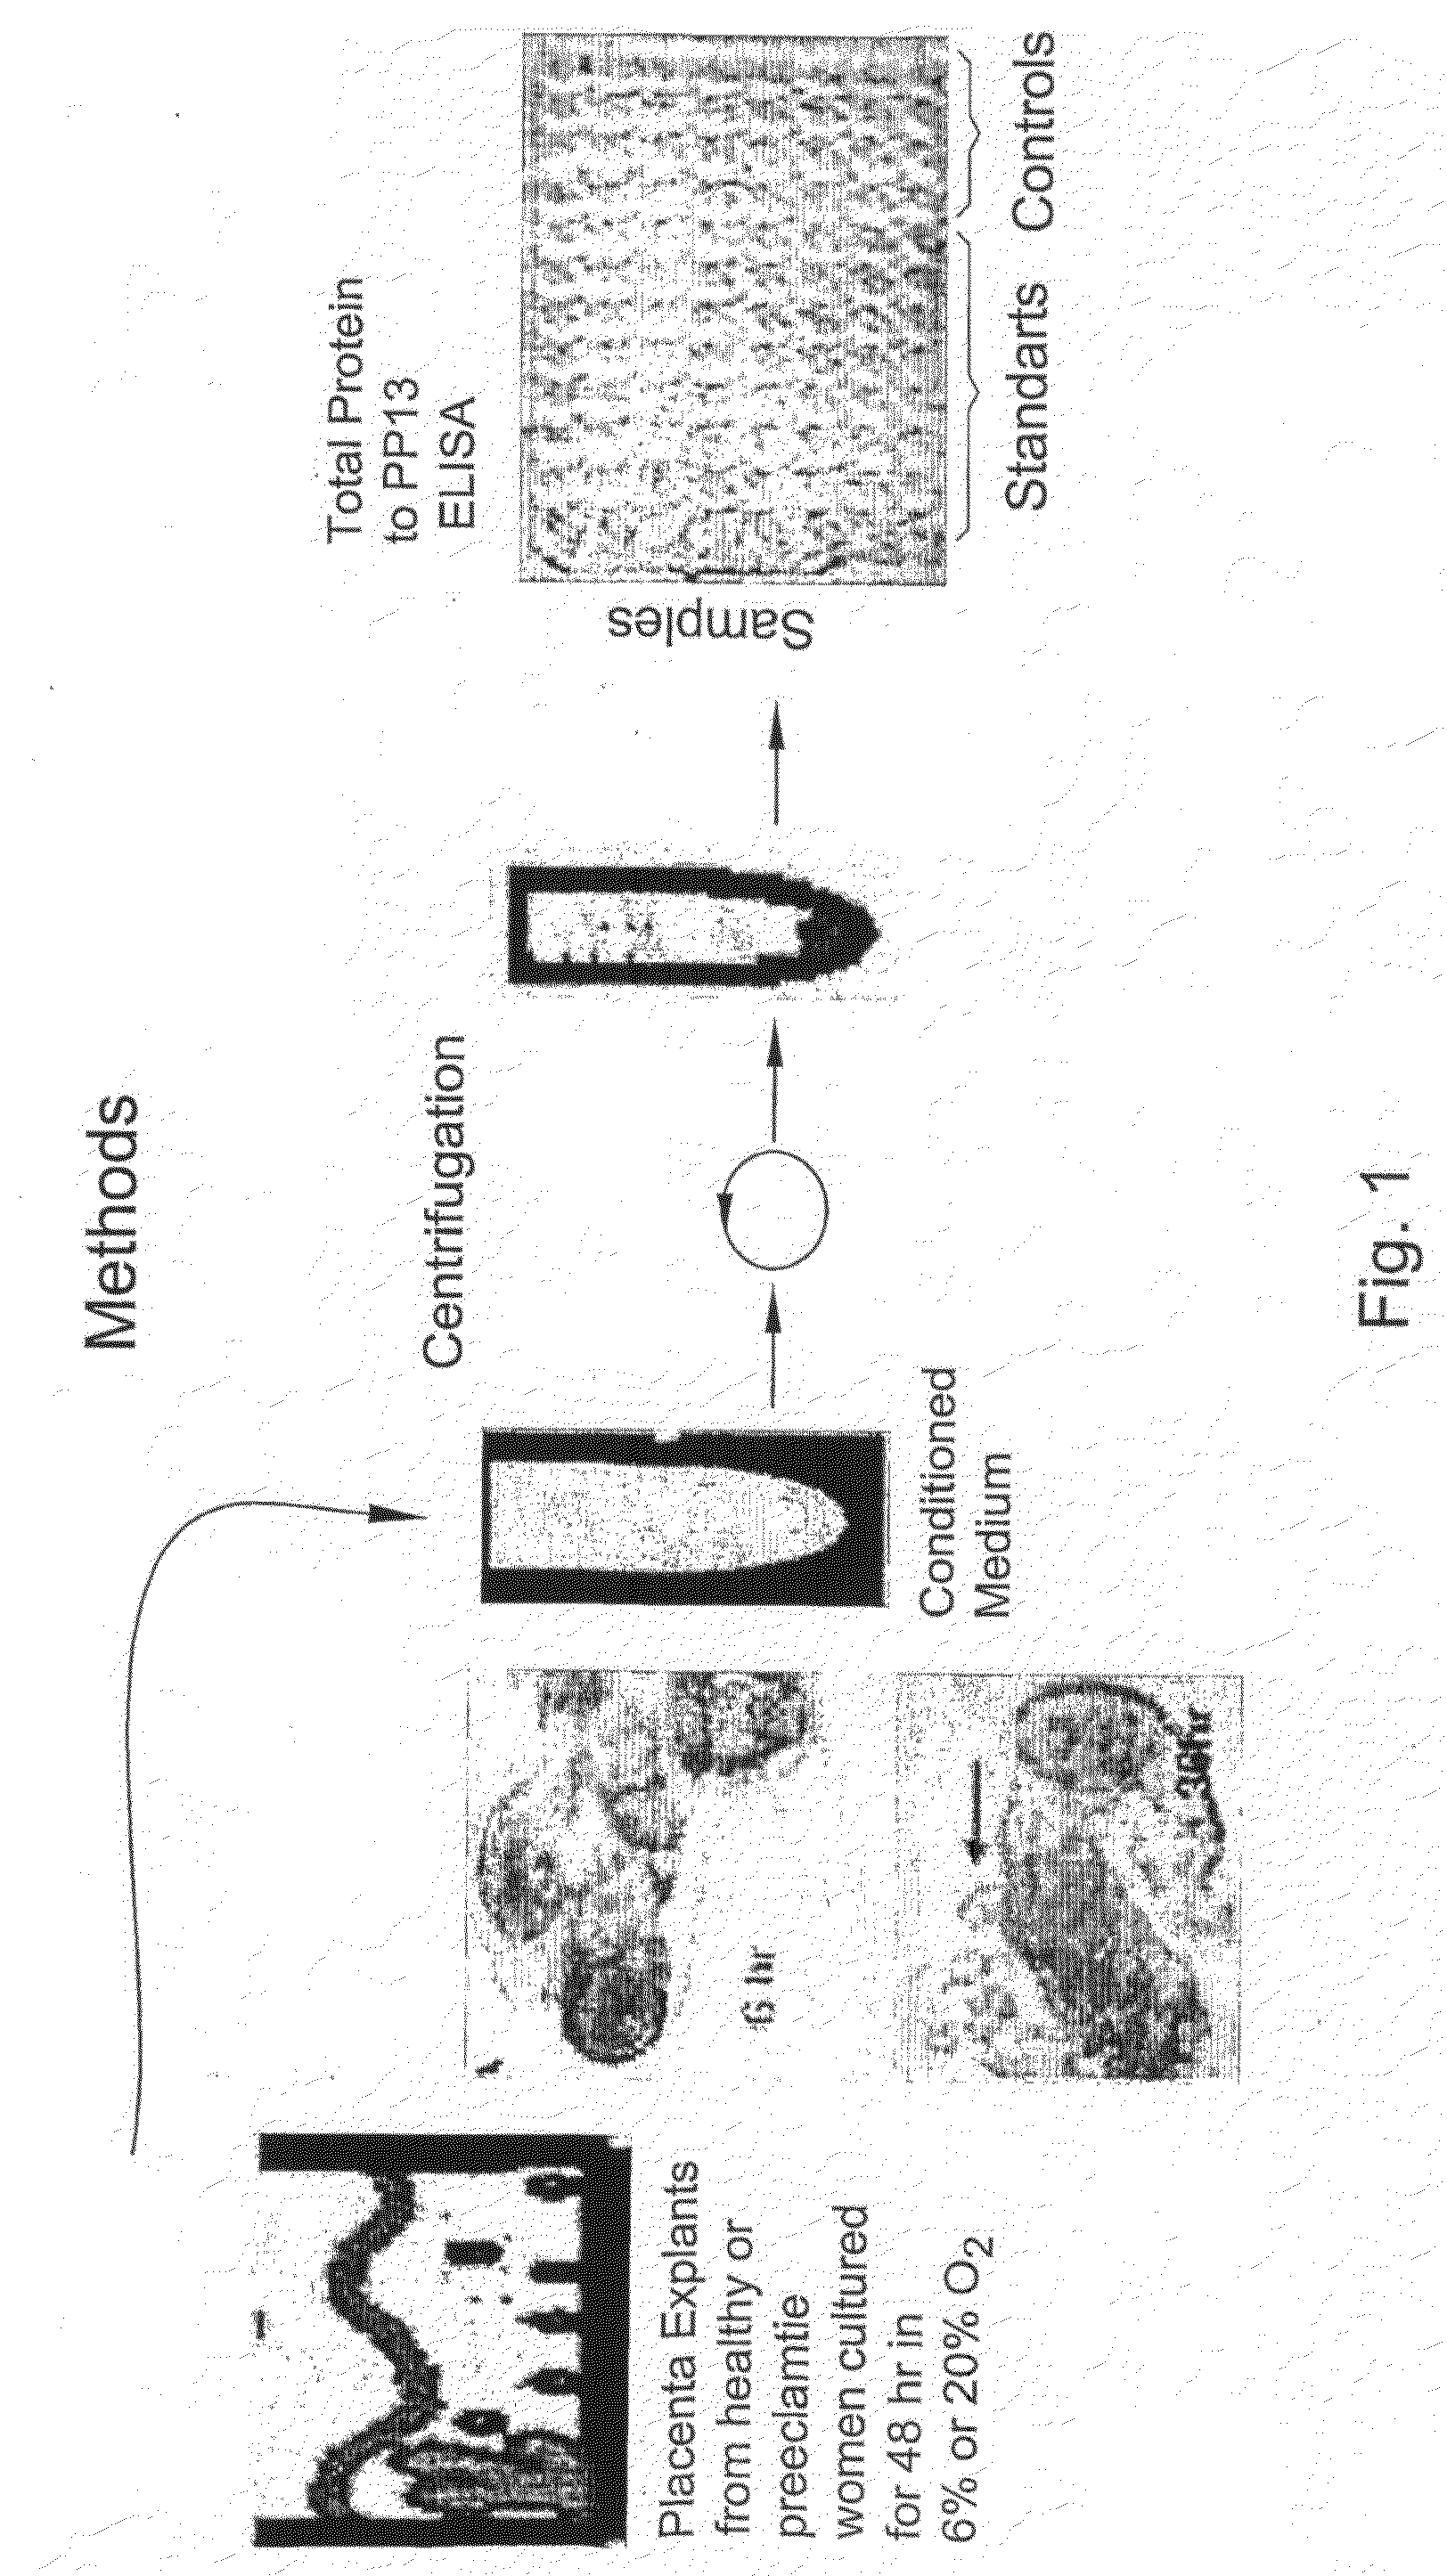 Method for Determining the Effectiveness of a Treatment for Preeclampsia